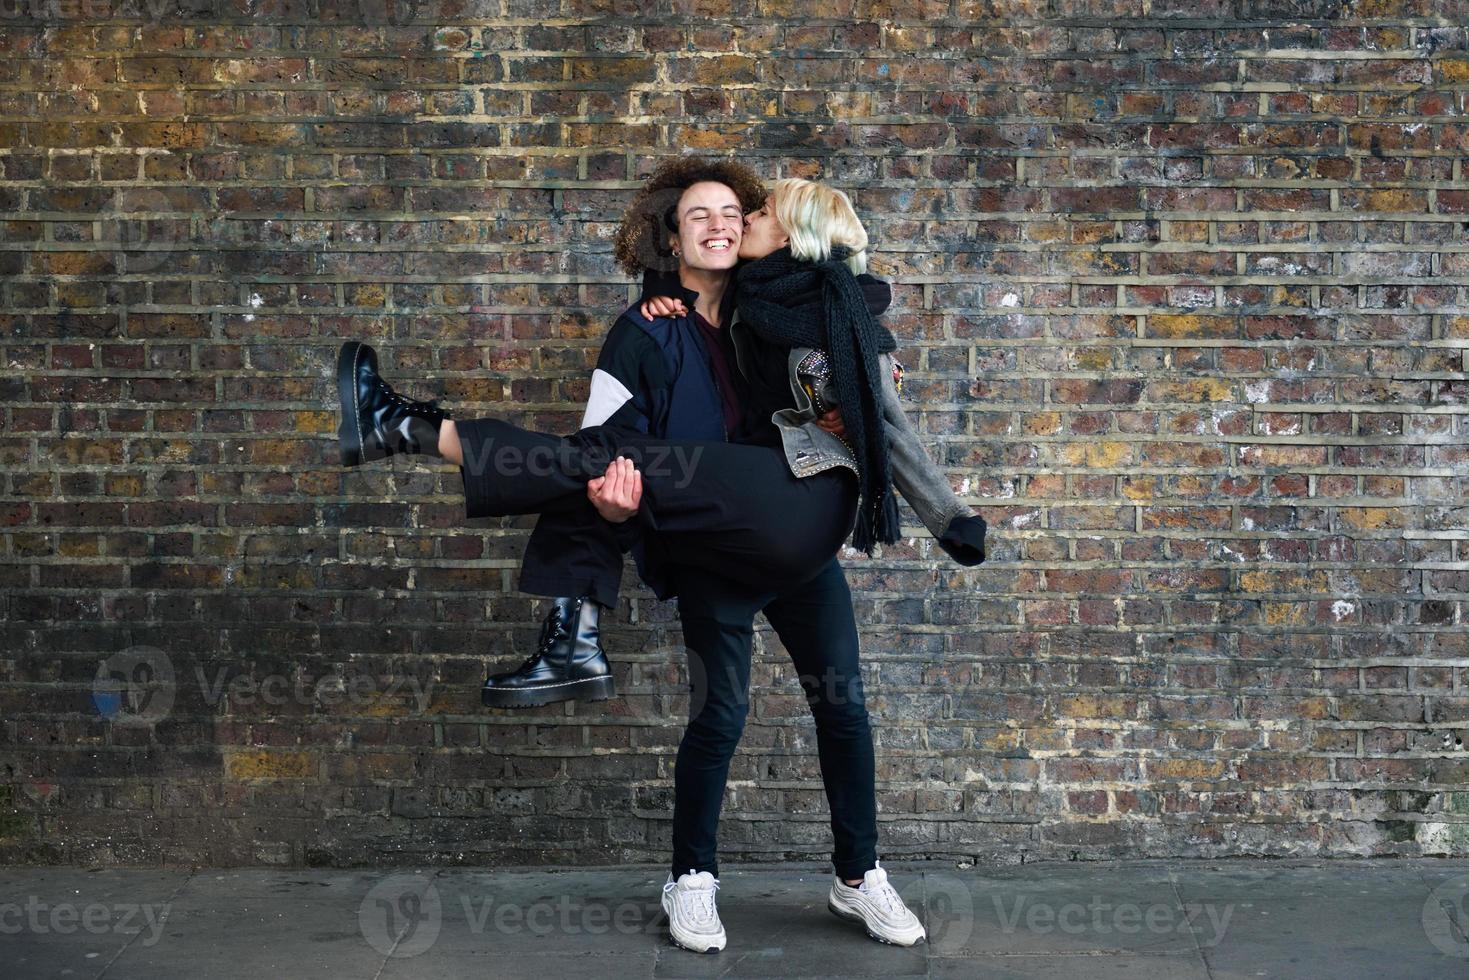 Man holding his girlfriend in his arms in front of a brick wall typical of London photo